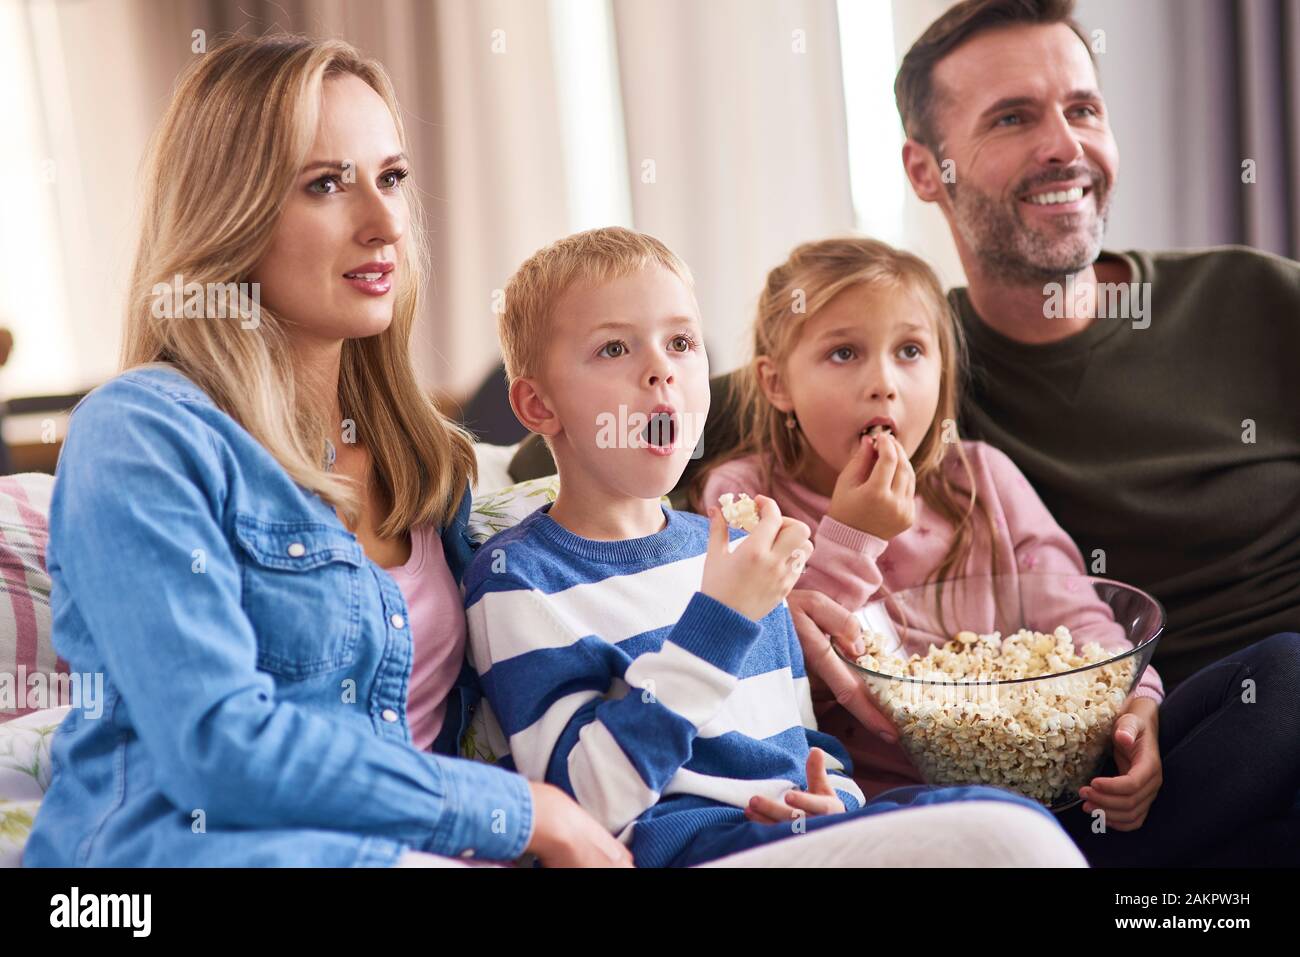 Family with two children watching TV in living room Stock Photo